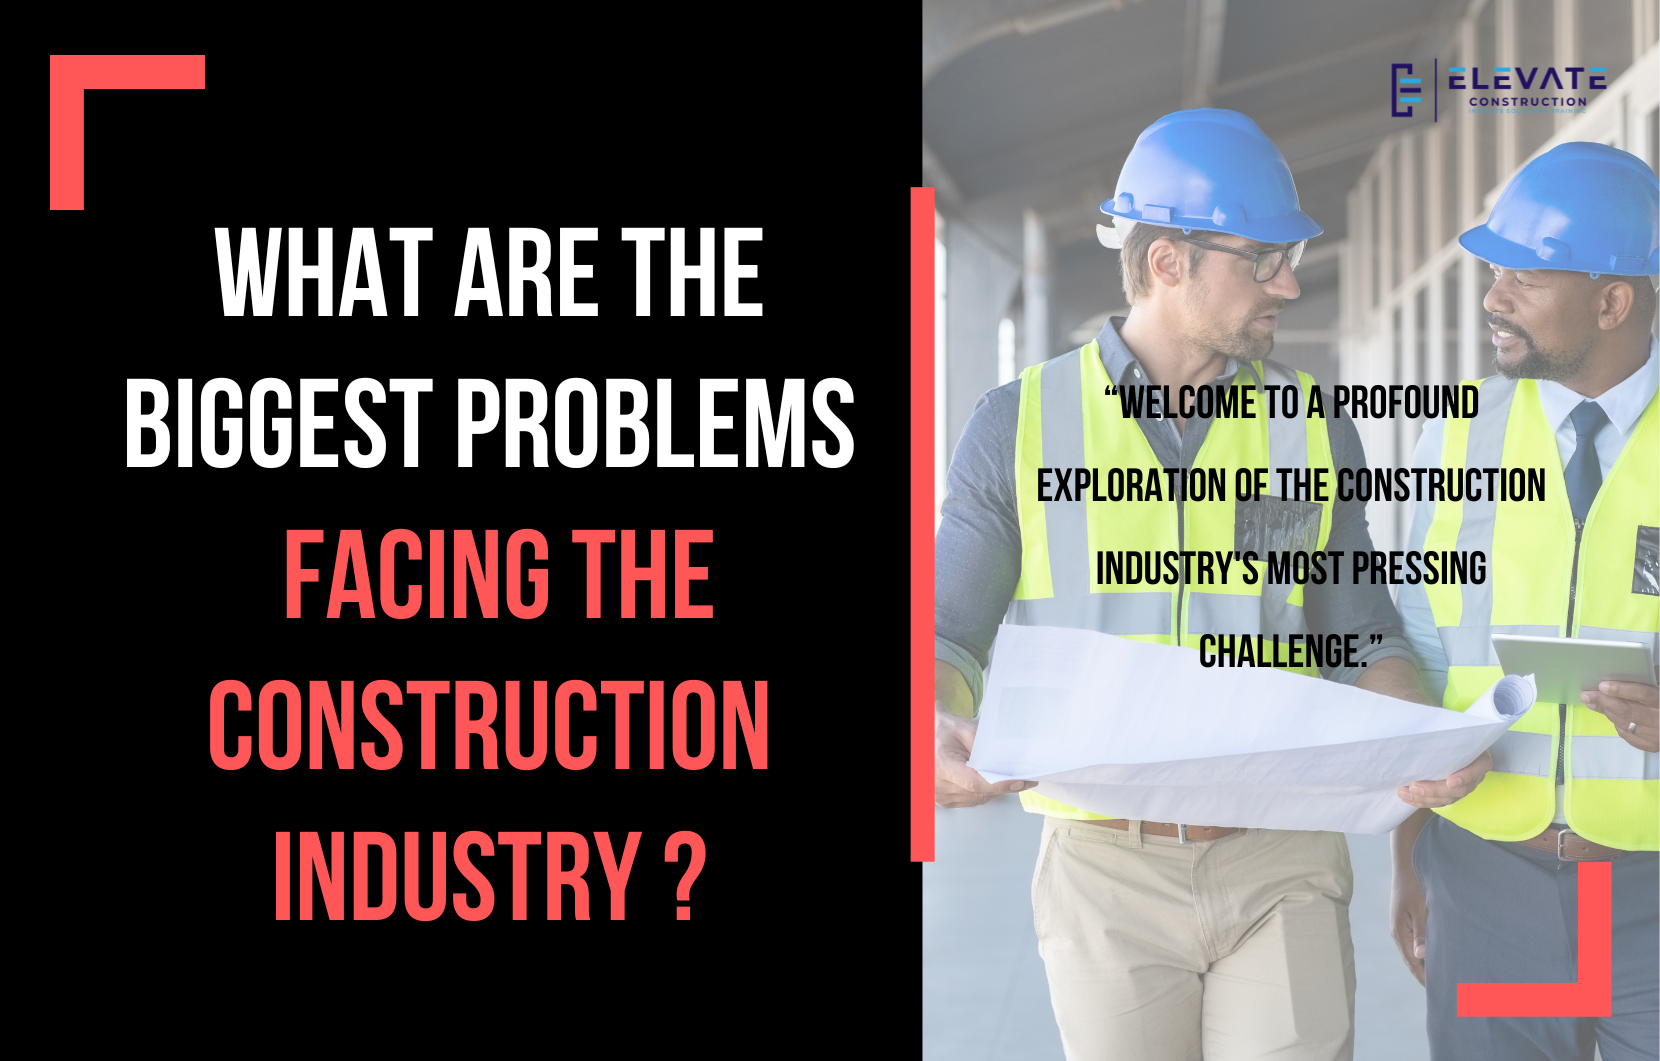 What Are The Biggest Problems Facing The Construction Industry?